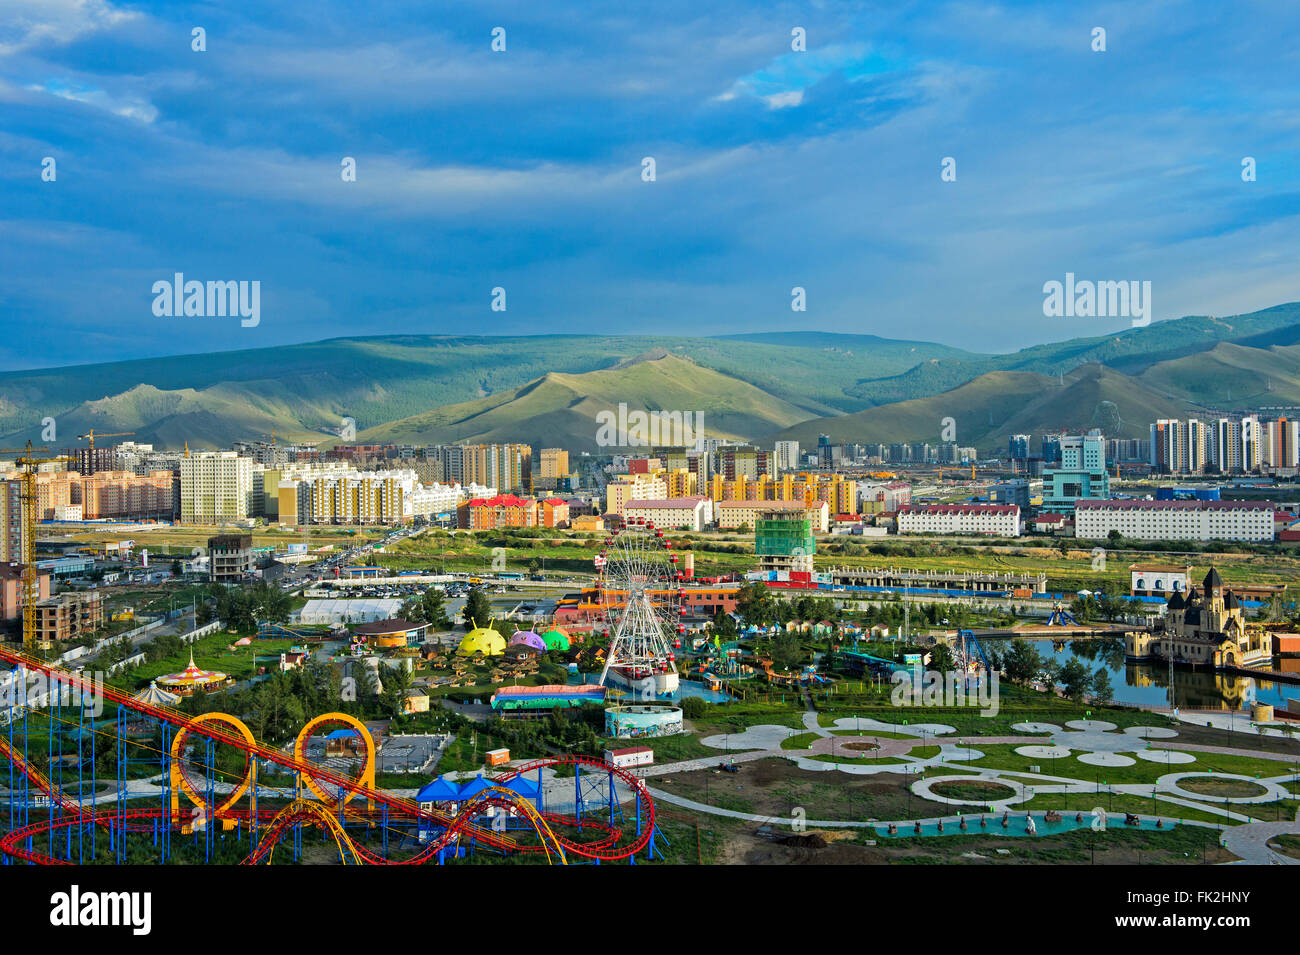 View over the National Amusement Park and the new residential areas in the South of Ulaanbataar, Capital of Mongolia Stock Photo